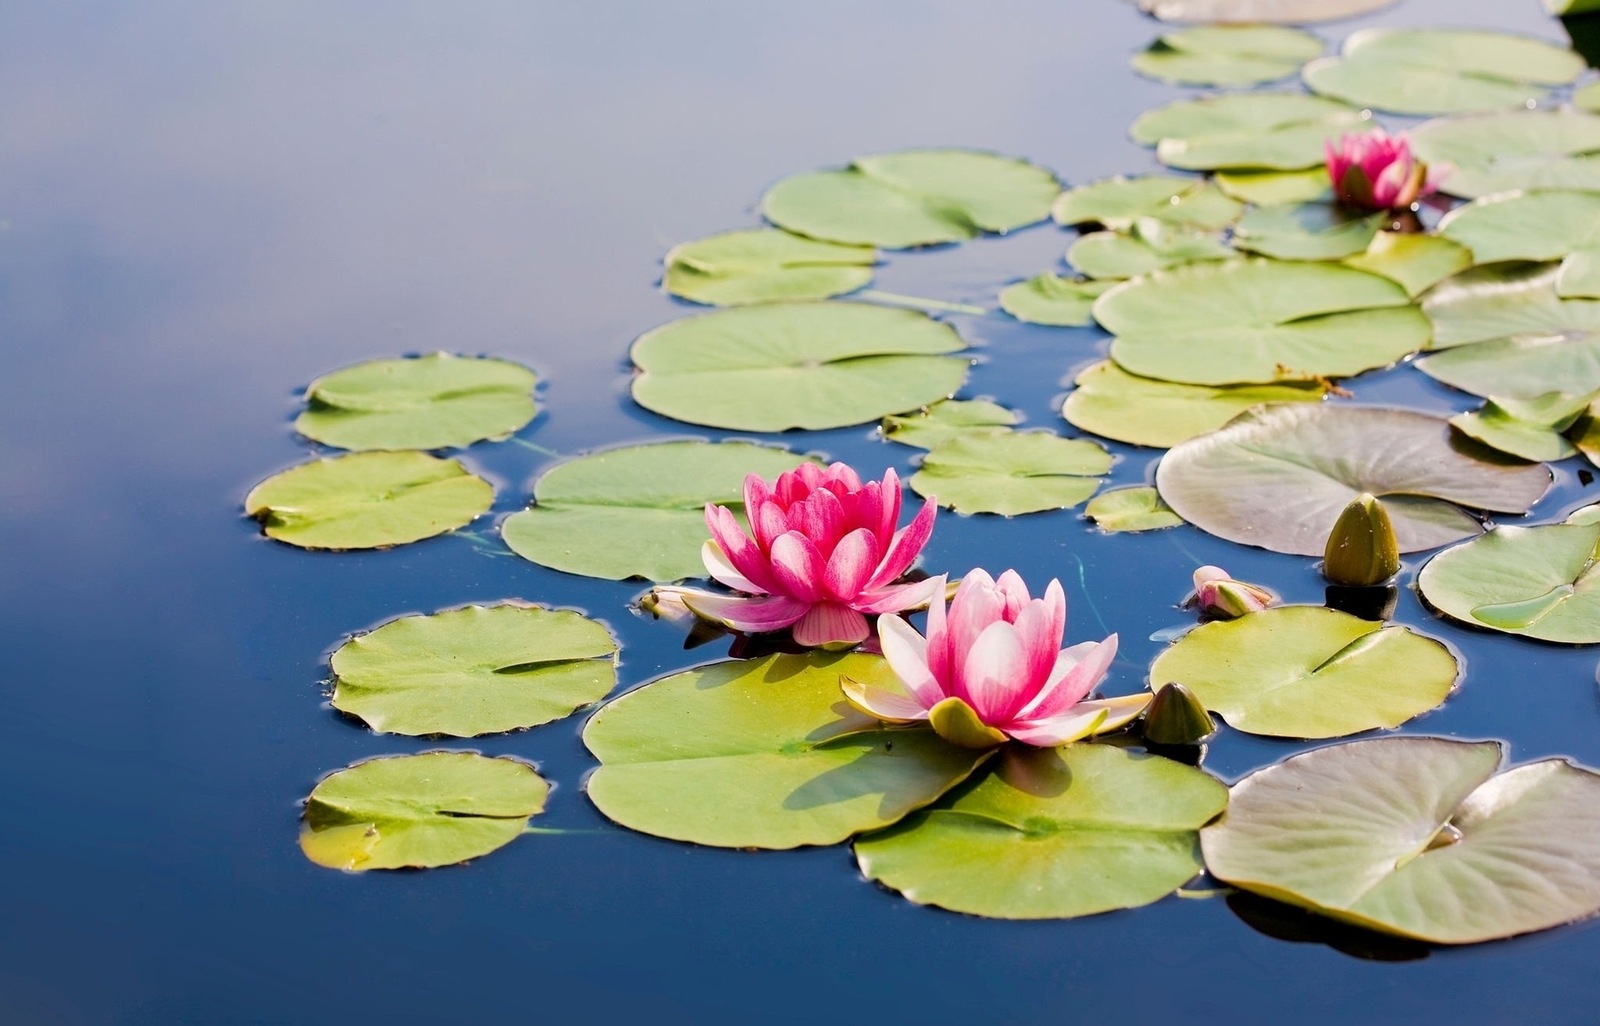 20-facts-about-the-lotus-flower